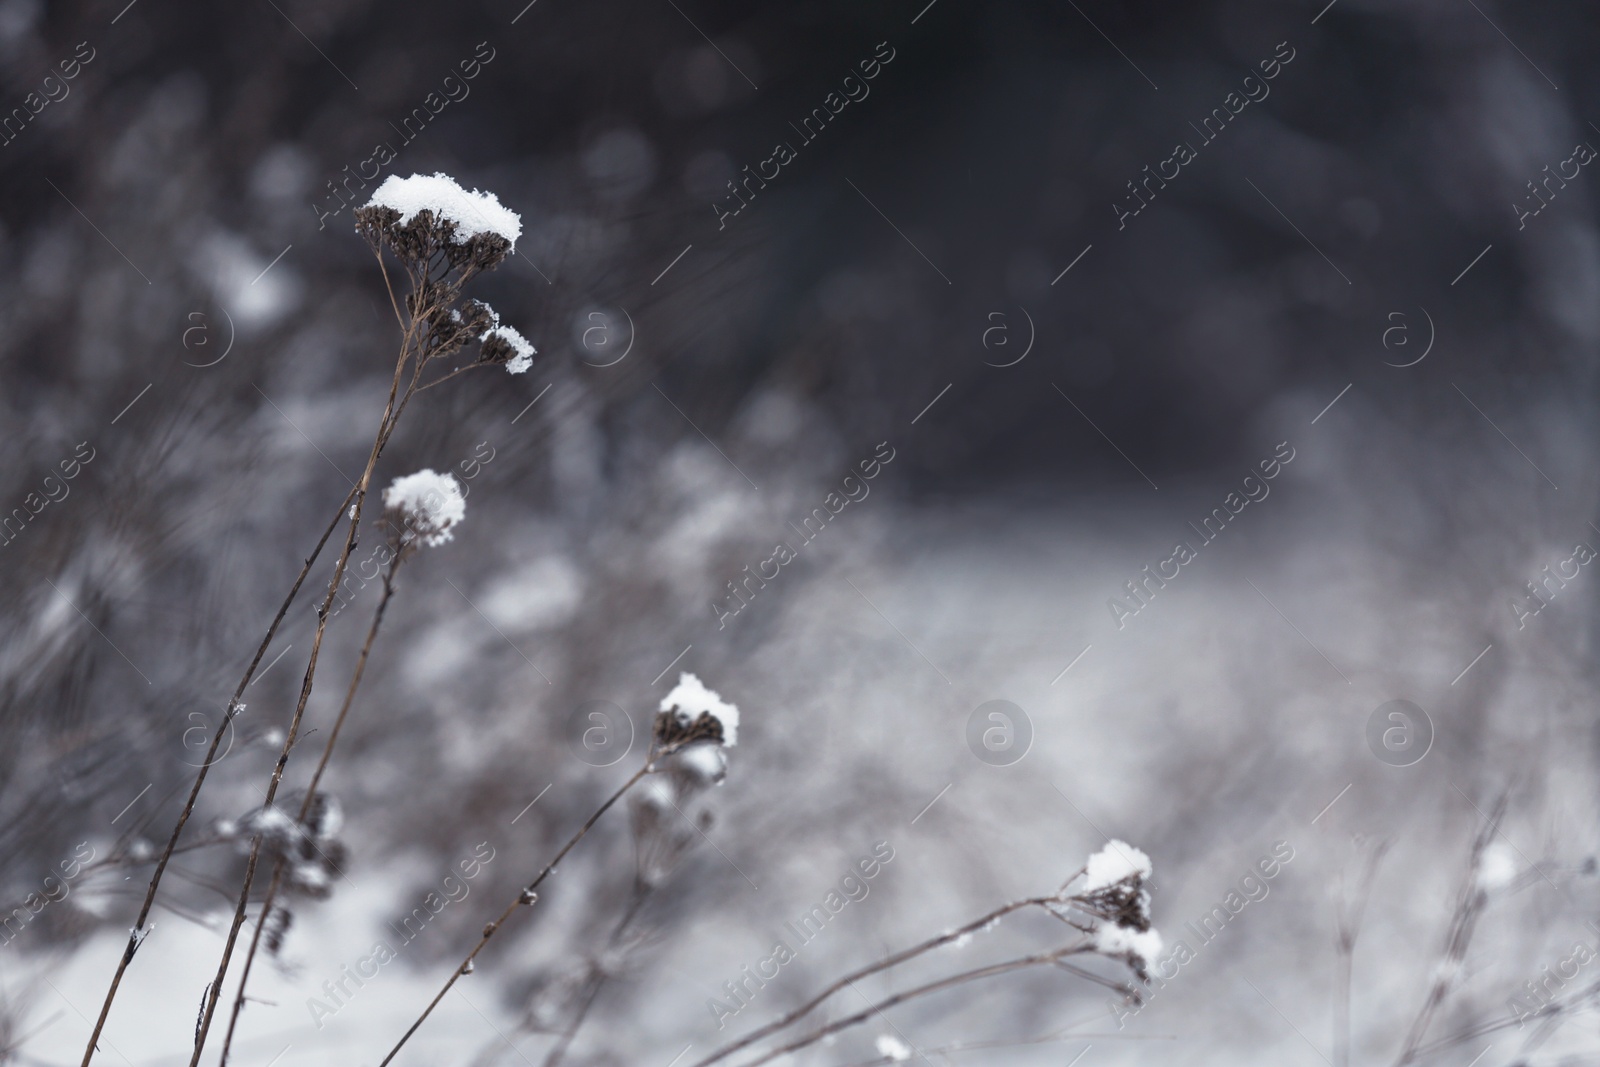 Photo of Dry plants covered with snow outdoors on cold winter morning, closeup